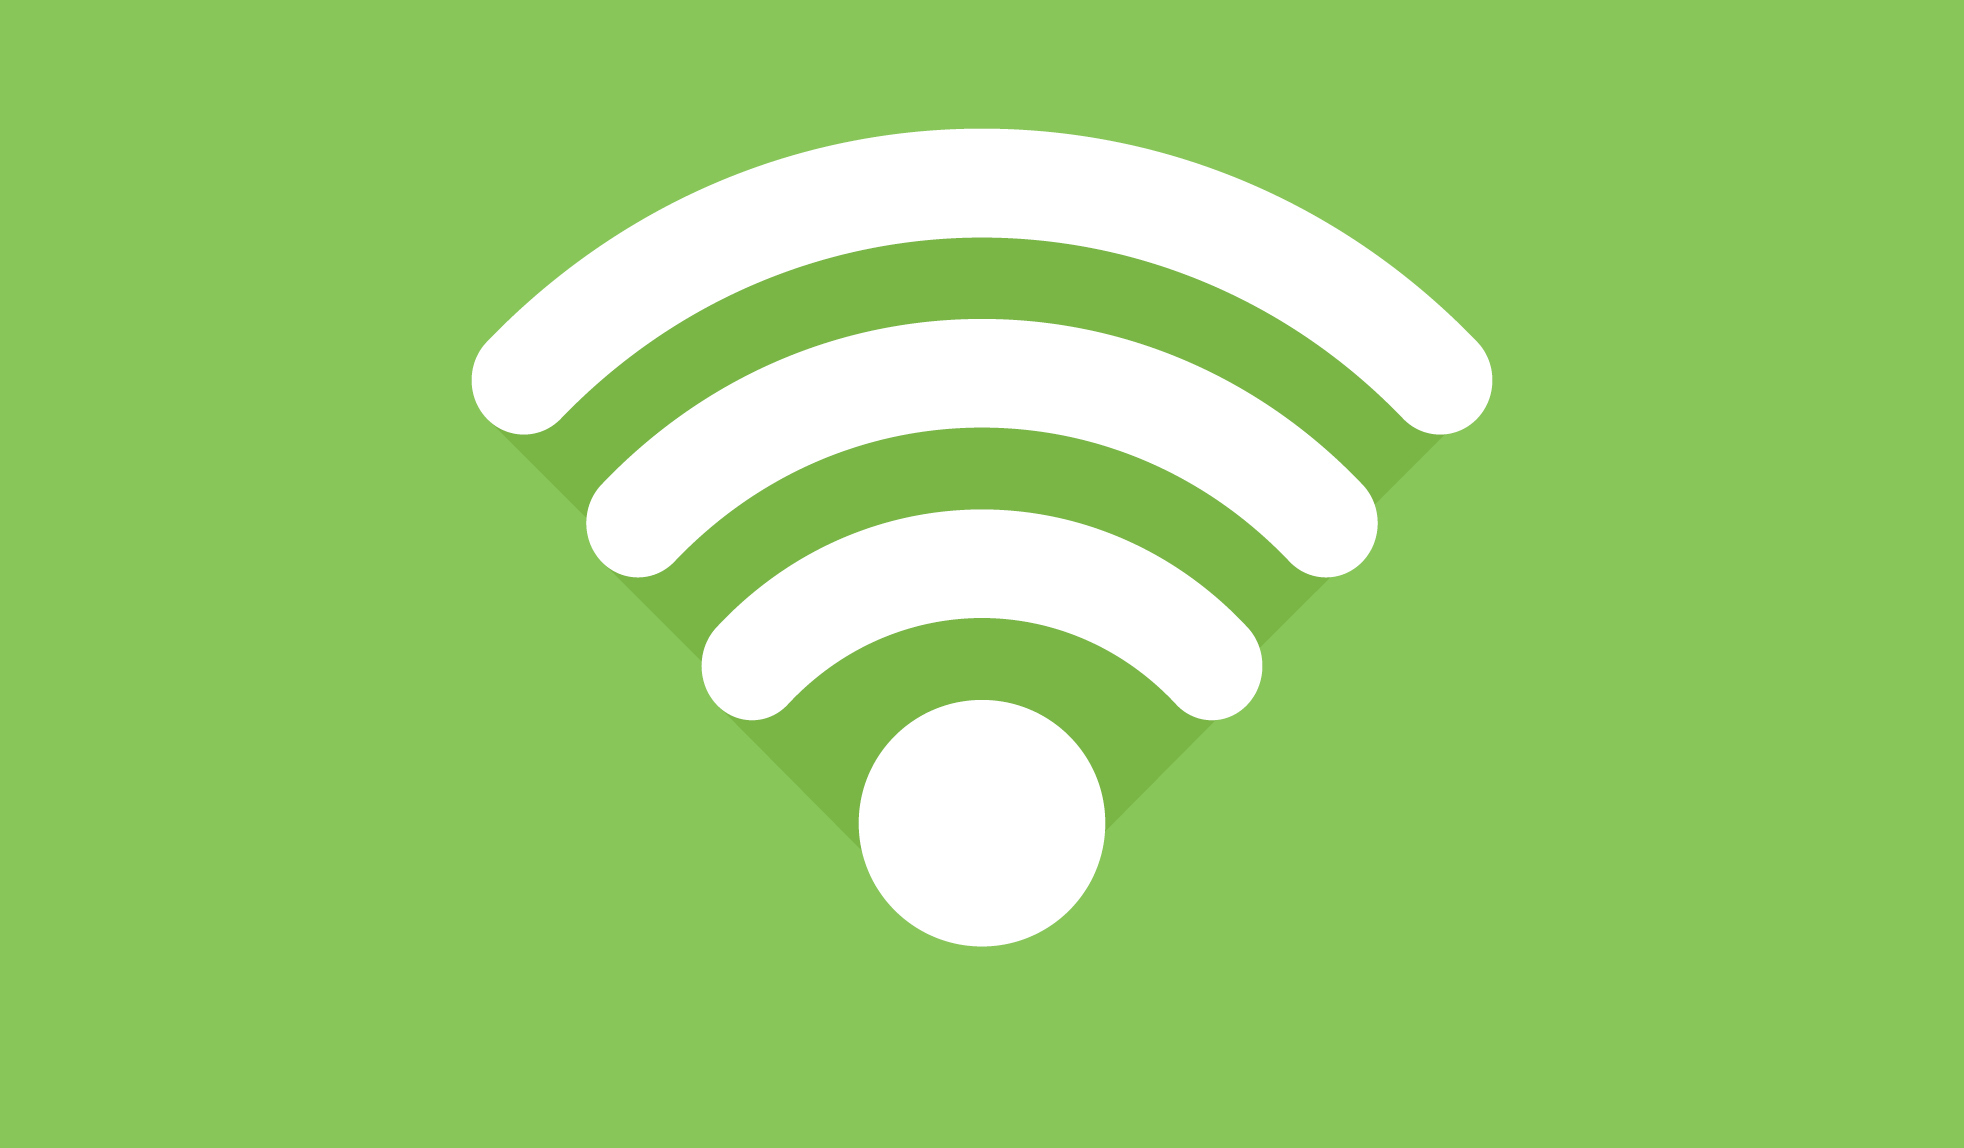 We offer free Wi-Fi, free access to public computers, and free Extended Wi-Fi at the Library.